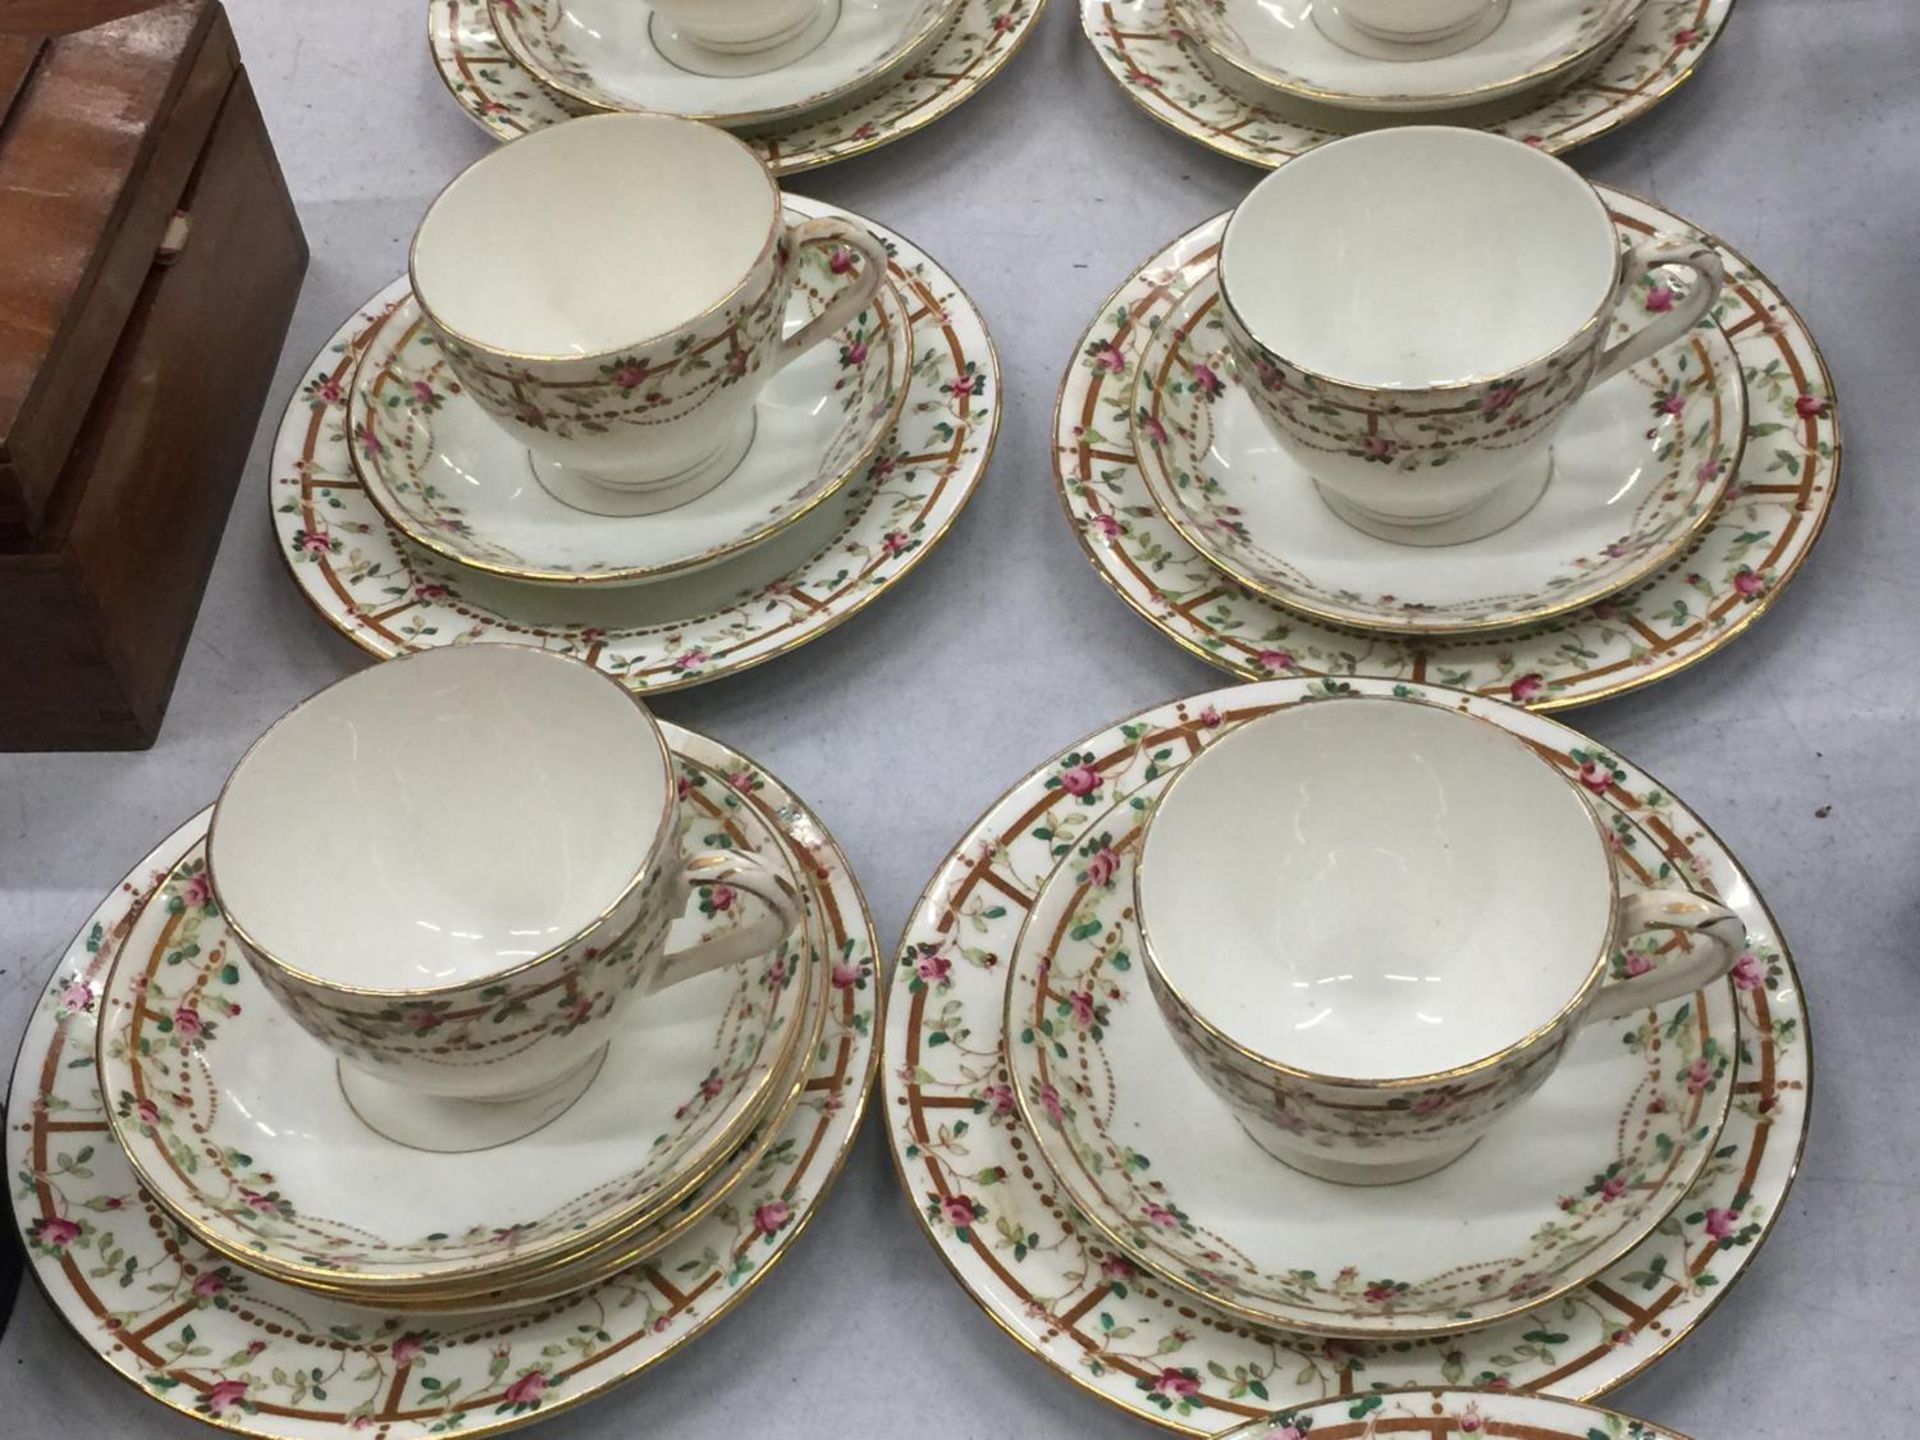 A QUANTITY OF QUEEN'S CHINA CUPS, SAUCERS AND SIDE PLATES - Image 4 of 6